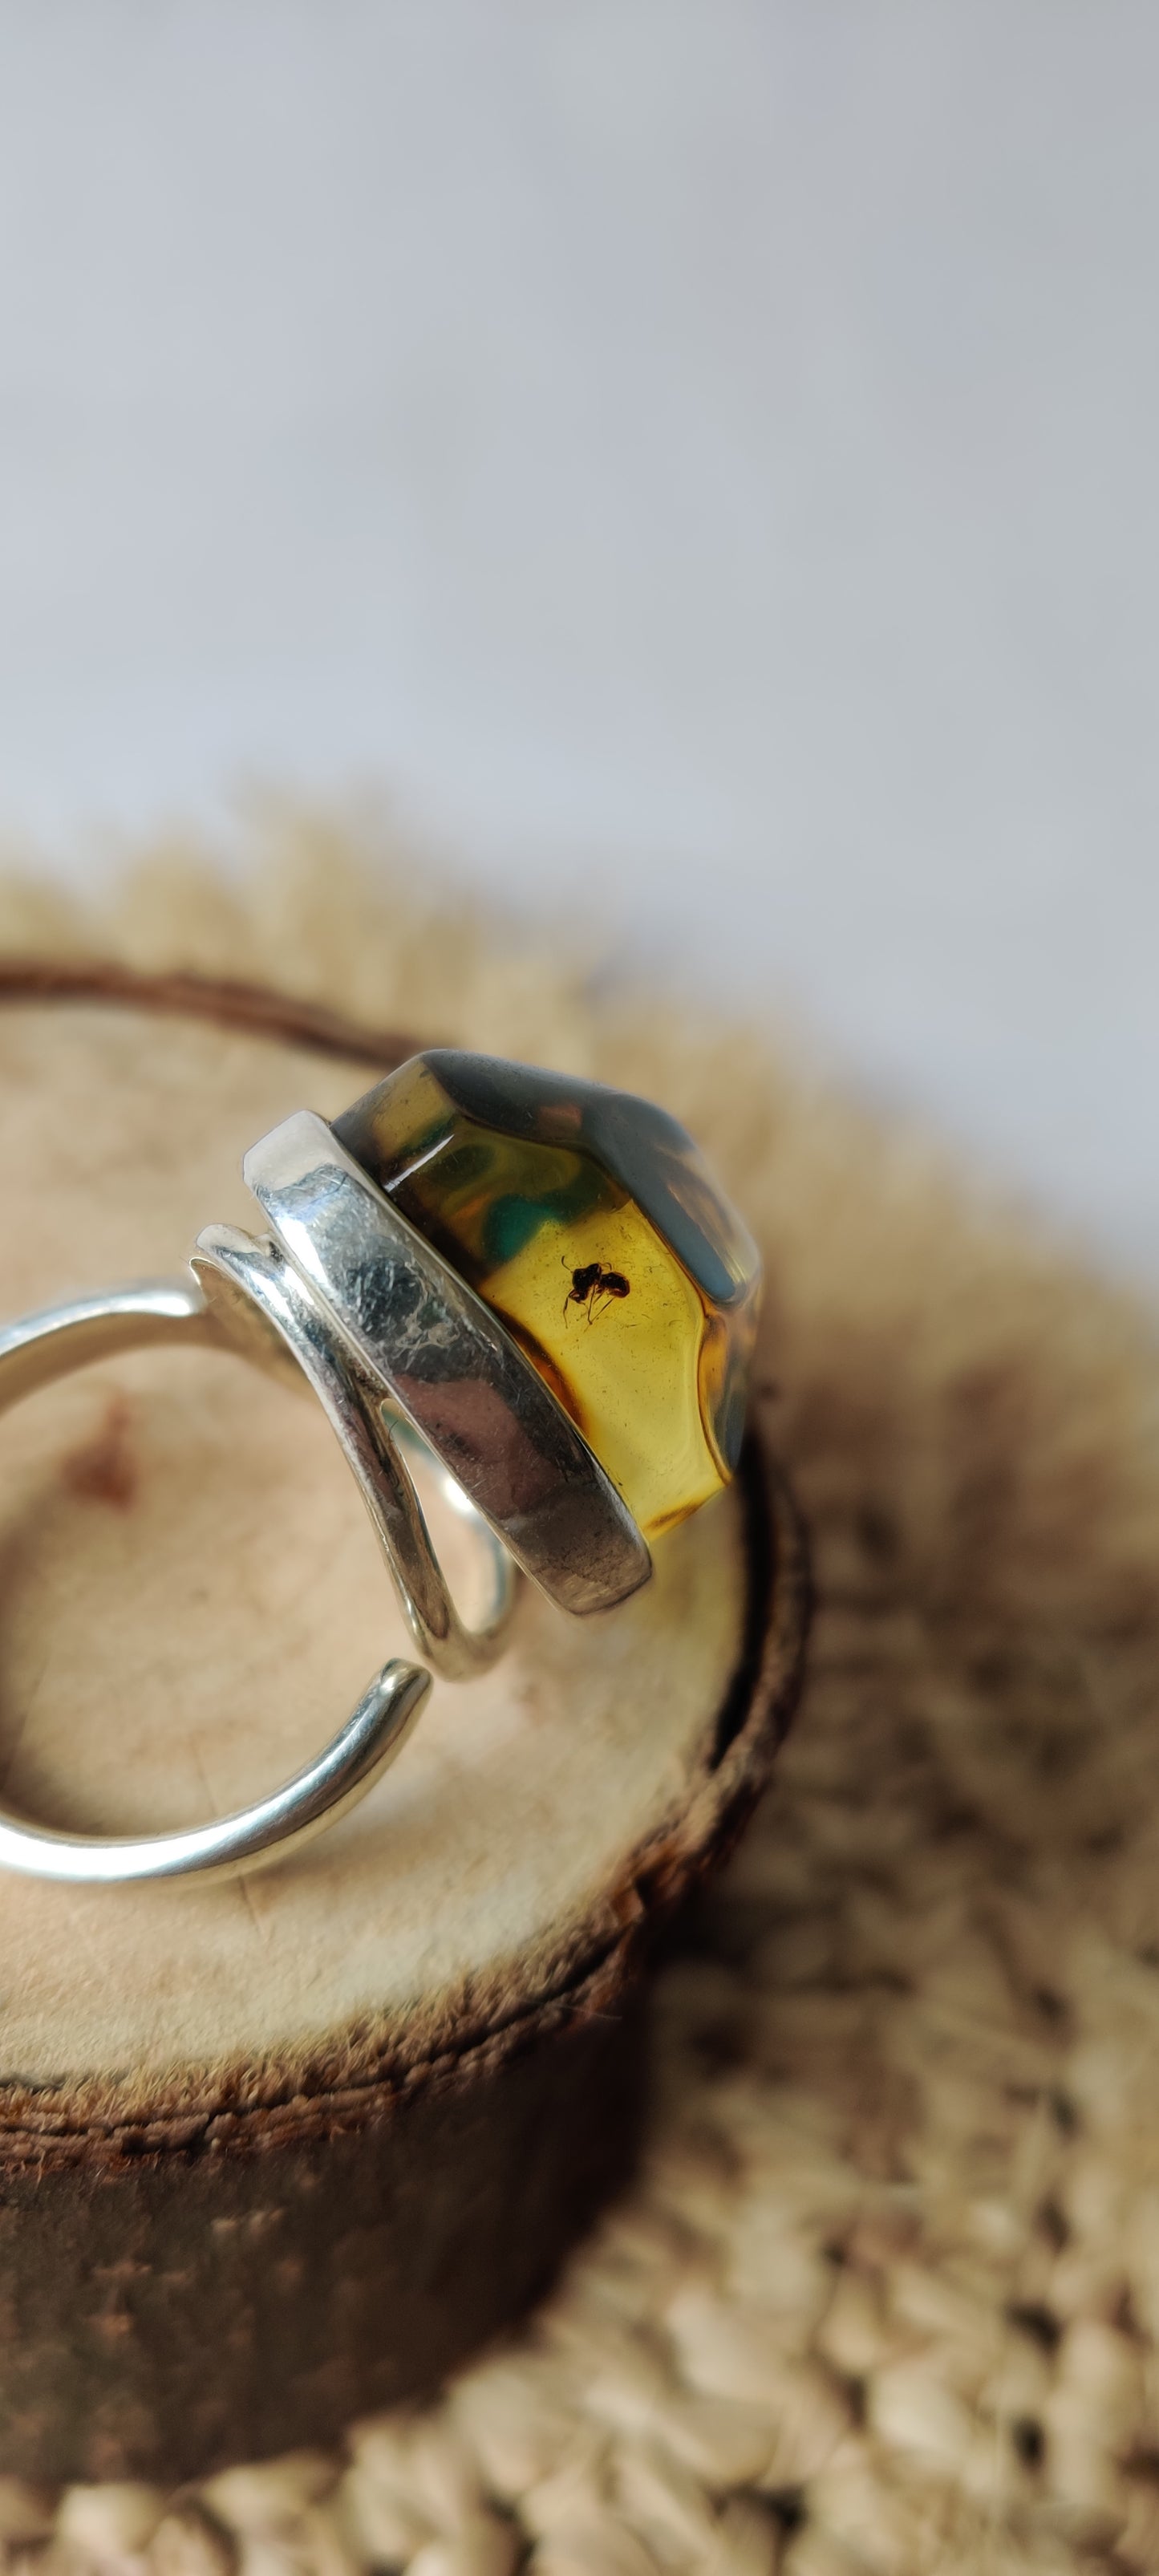 Unique Blue/ Citron Amber Ring with Insect (Ant) inclusion